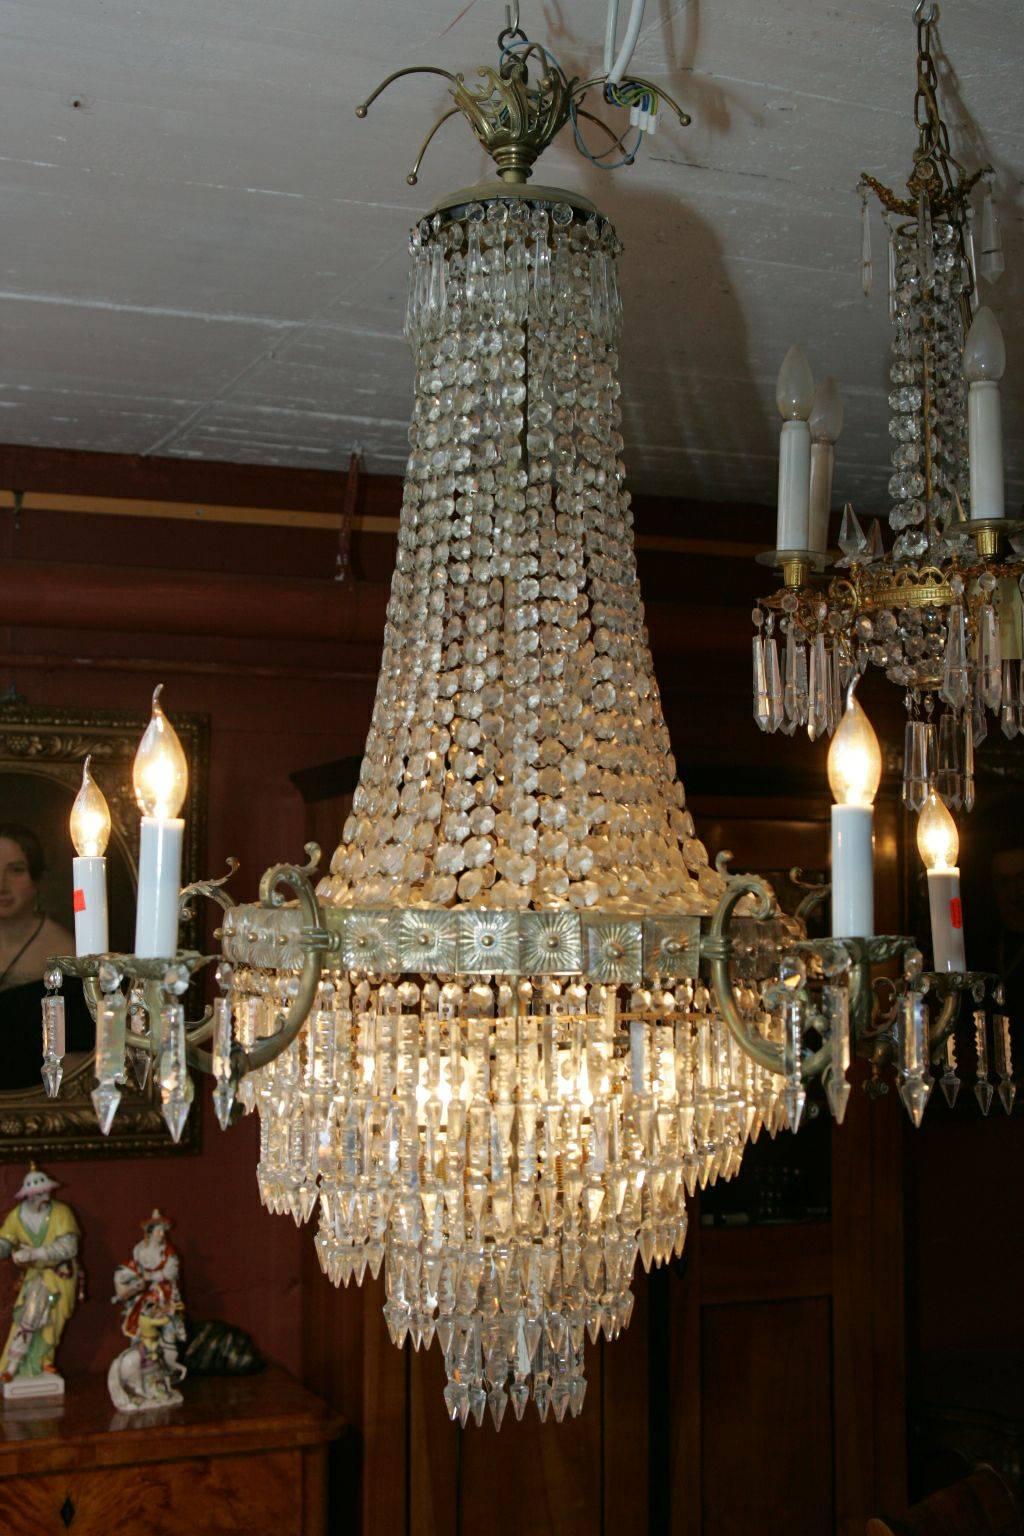 Classic antique ceiling chandelier in the Biedermeier style, circa 1900.
Brass chiselled. Baluster-shaped corpus of hand-wired, faceted glass cords. Broad luster ring Outgoing five curved armor arms ending in vase-shaped grommets over round eaves.